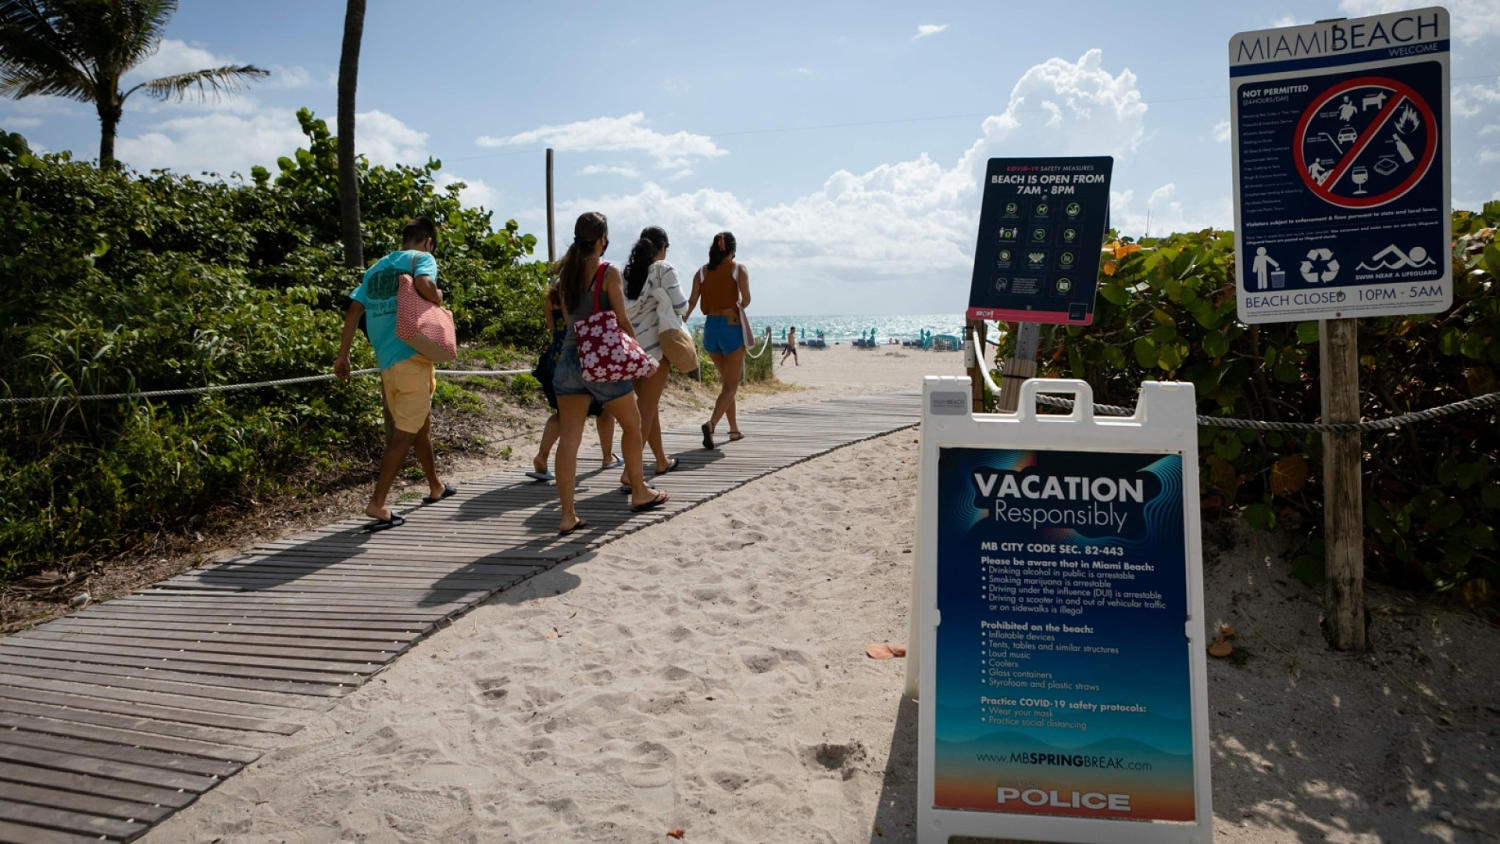 Miami beaches—Information, rules and safety tips—Time Out